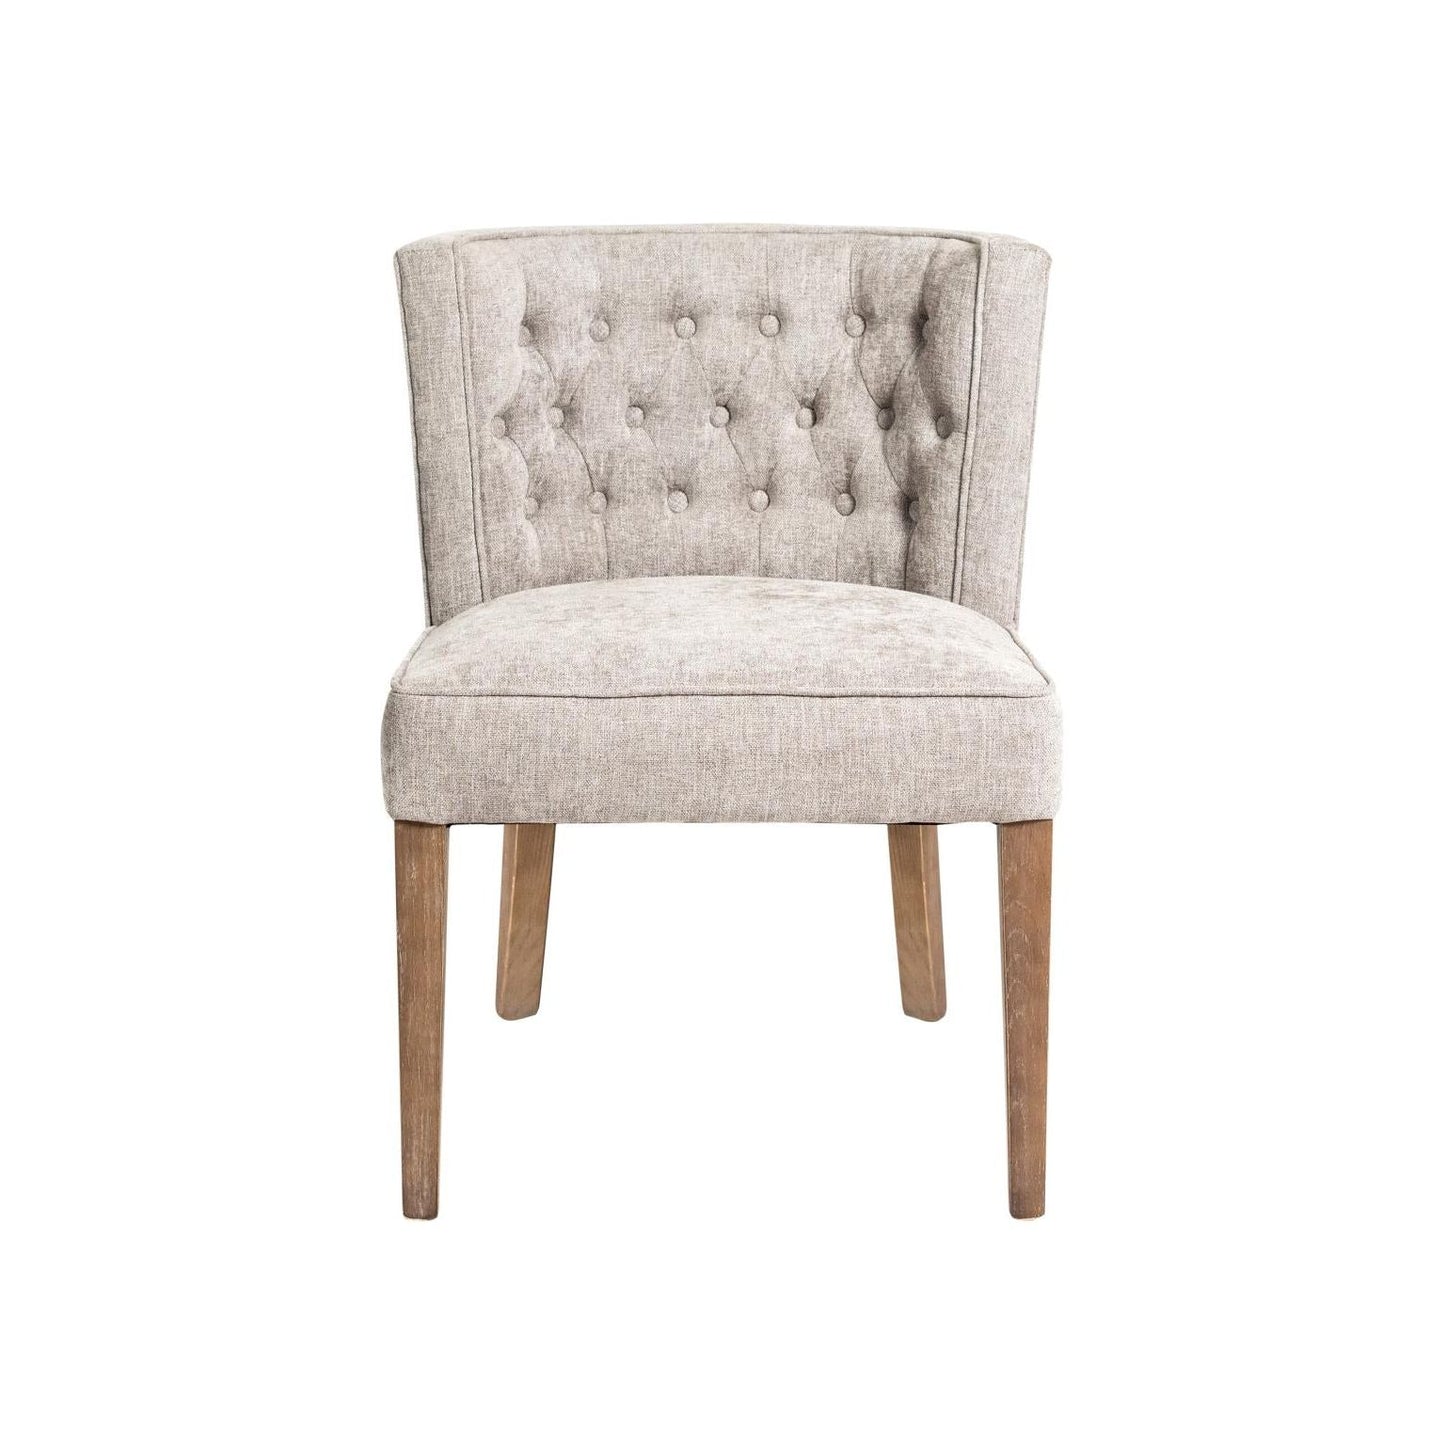 This is an image of the Stella Armchair, a beige tufted accent chair with a high, curved backrest and wooden legs. The chair is upholstered in a light beige fabric with diamond tufting detail on the backrest.